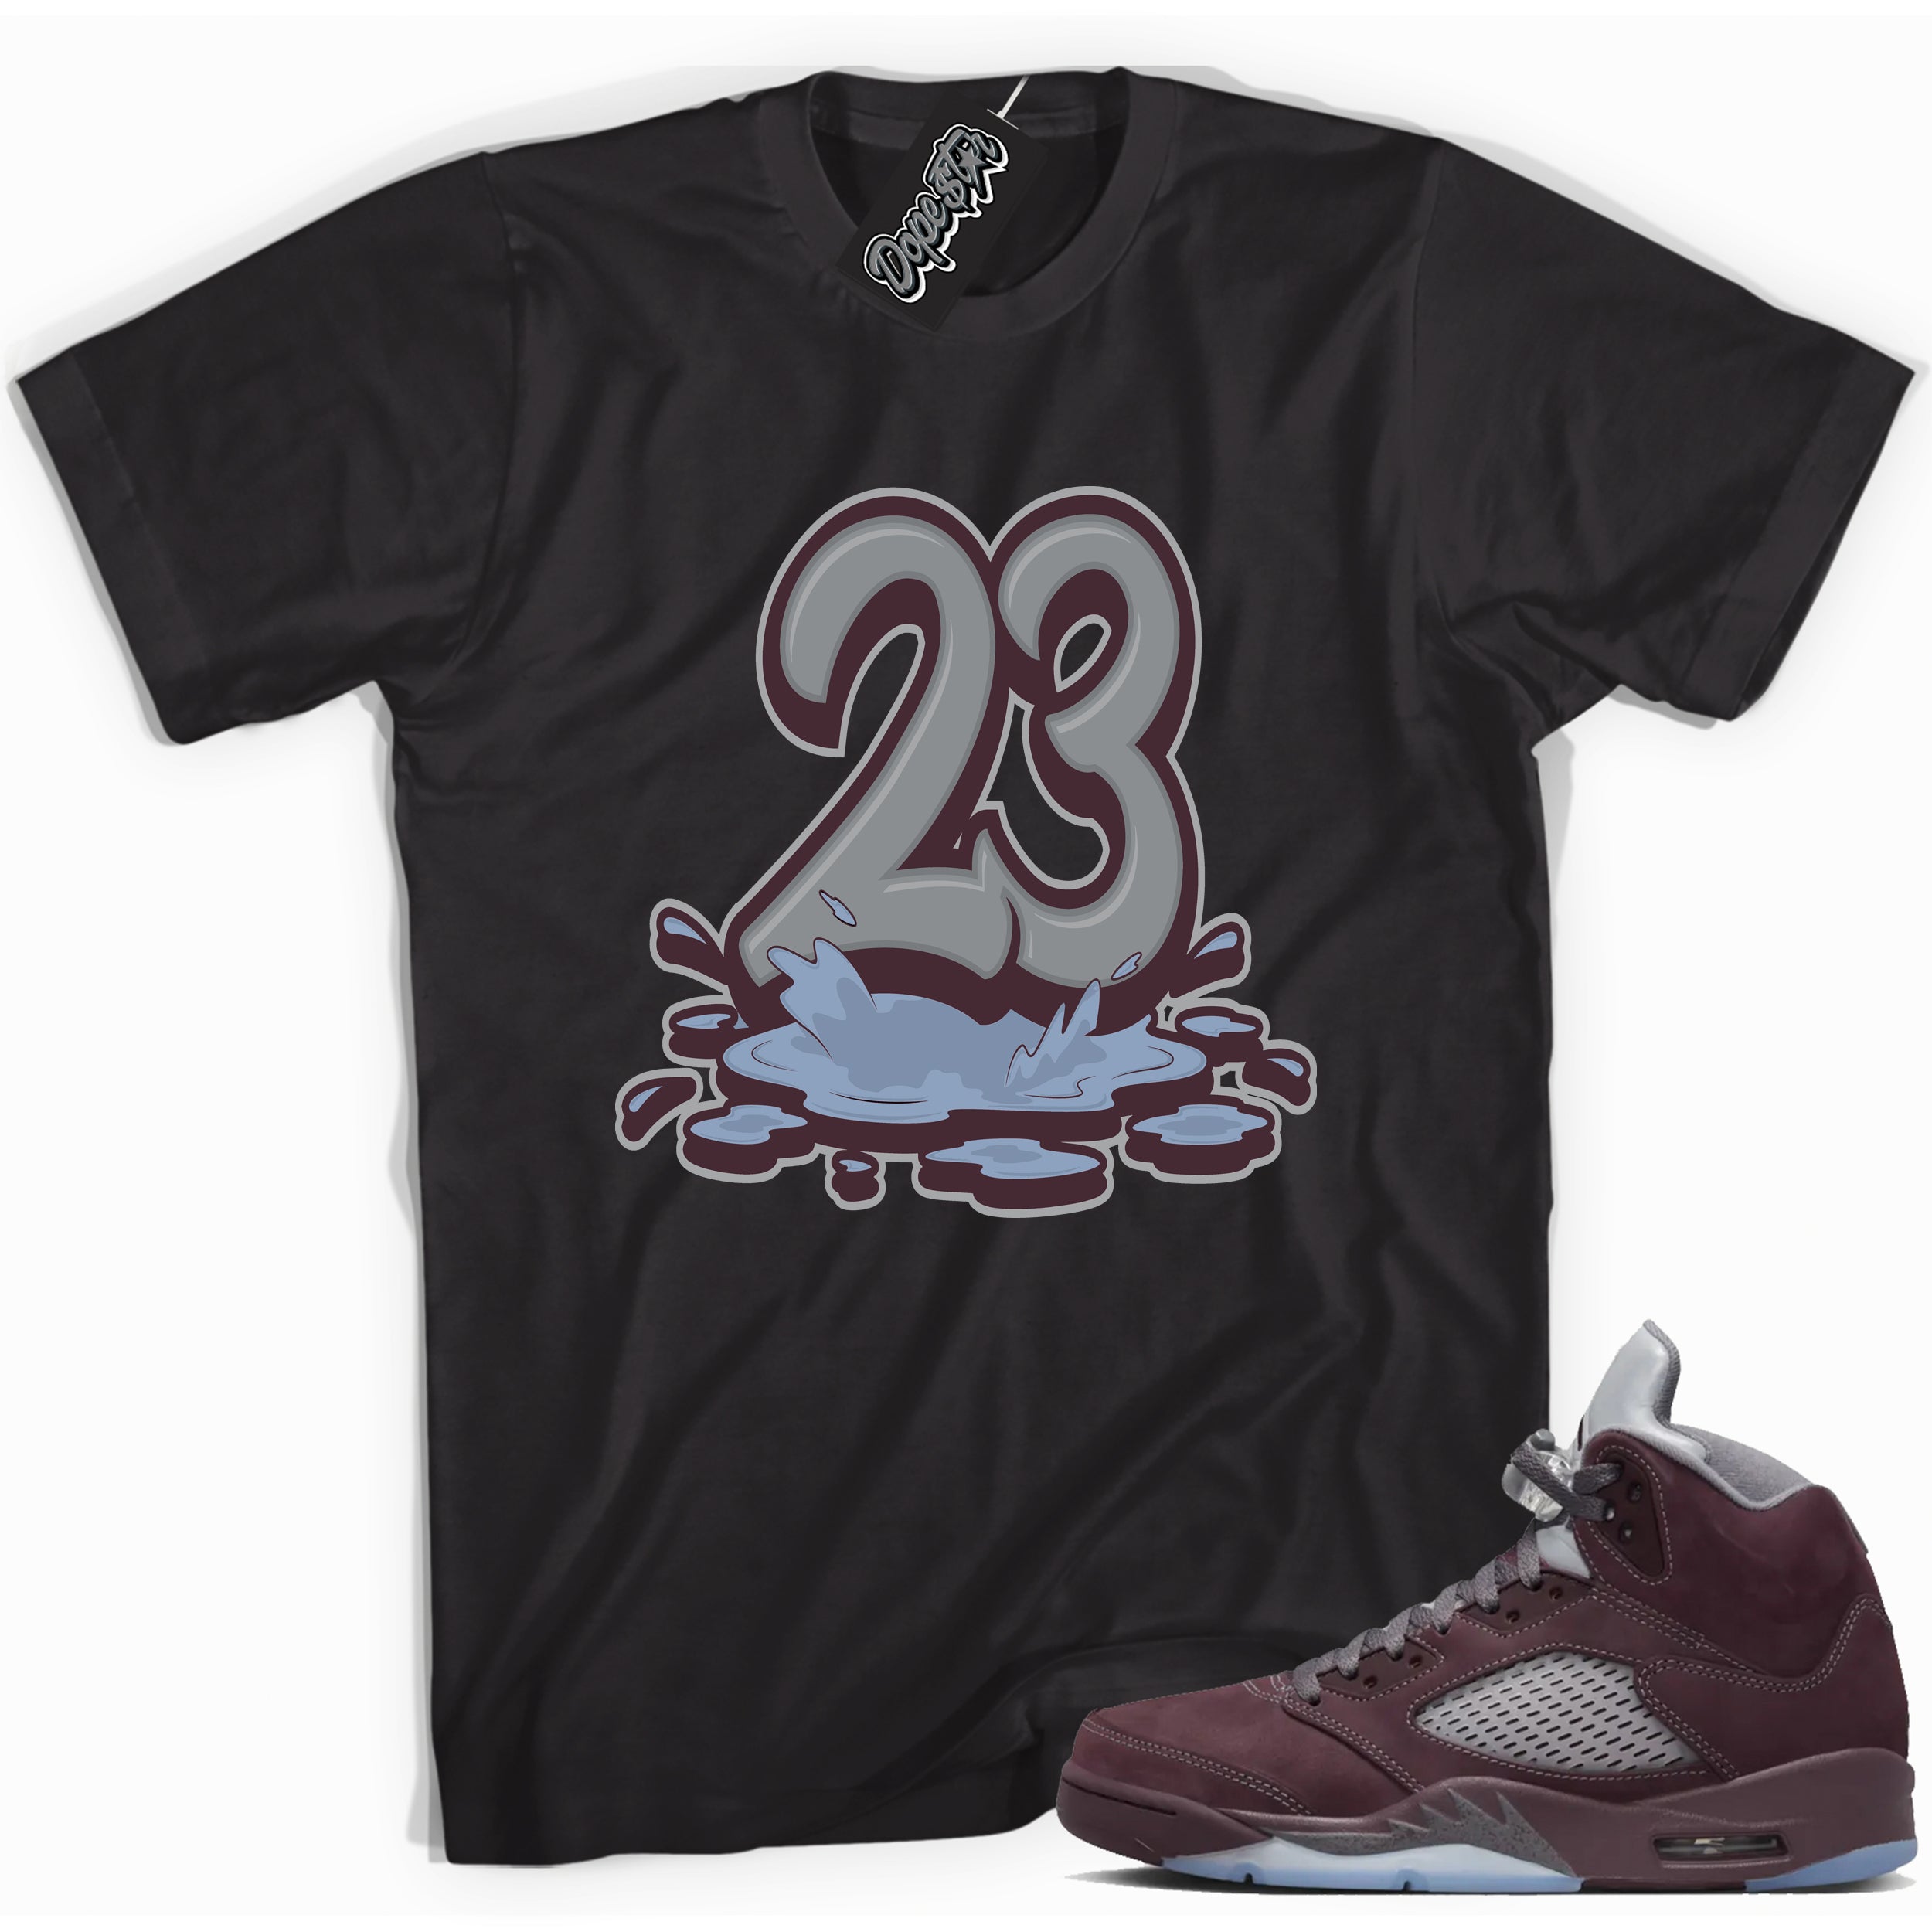 Cool Black graphic tee with “ 23 Melting ” print, that perfectly matches Air Jordan 5 Burgundy 2023 sneakers 